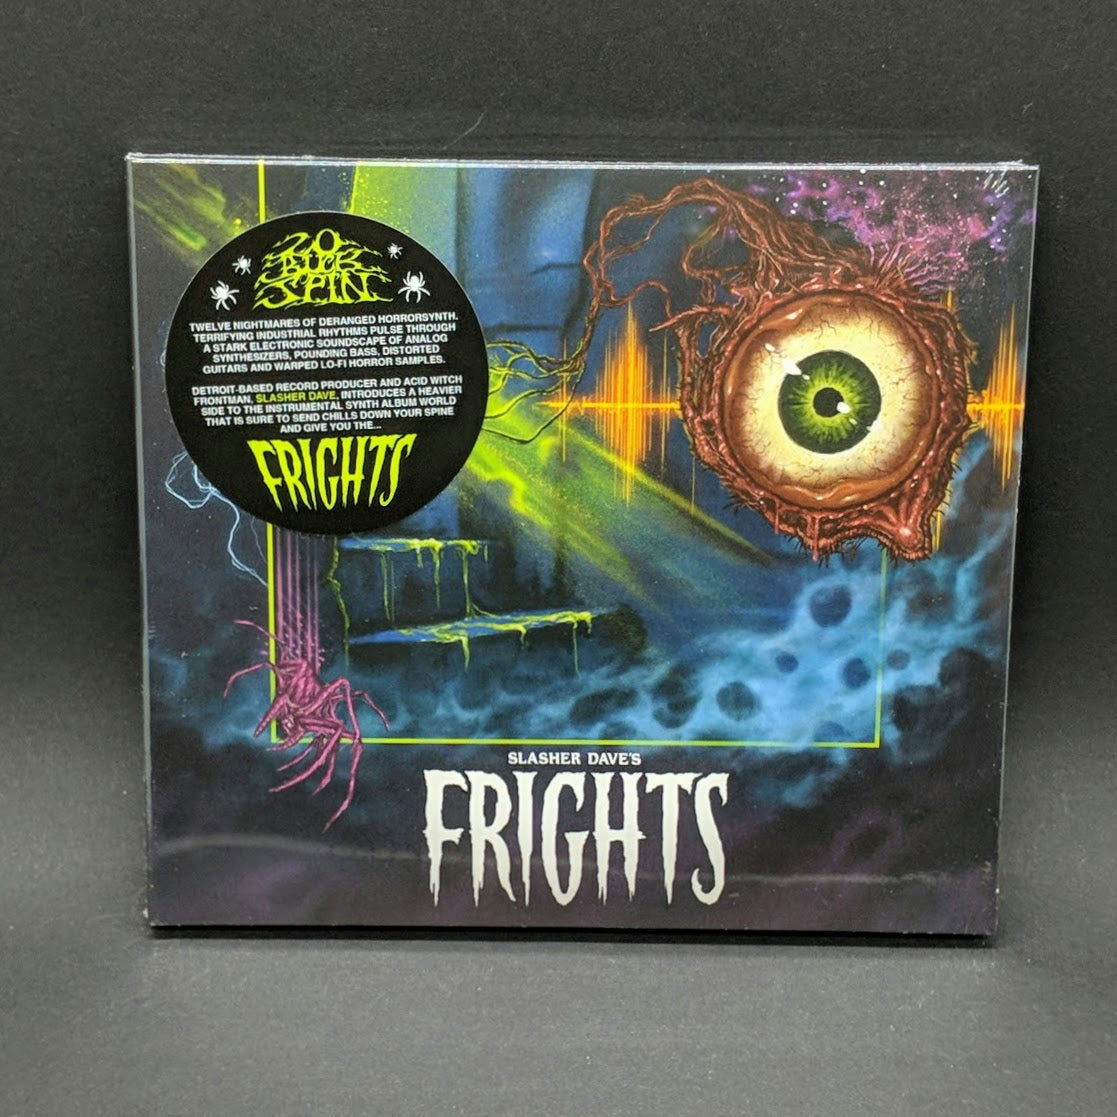 [SOLD OUT] SLASHER DAVE "Frights" CD